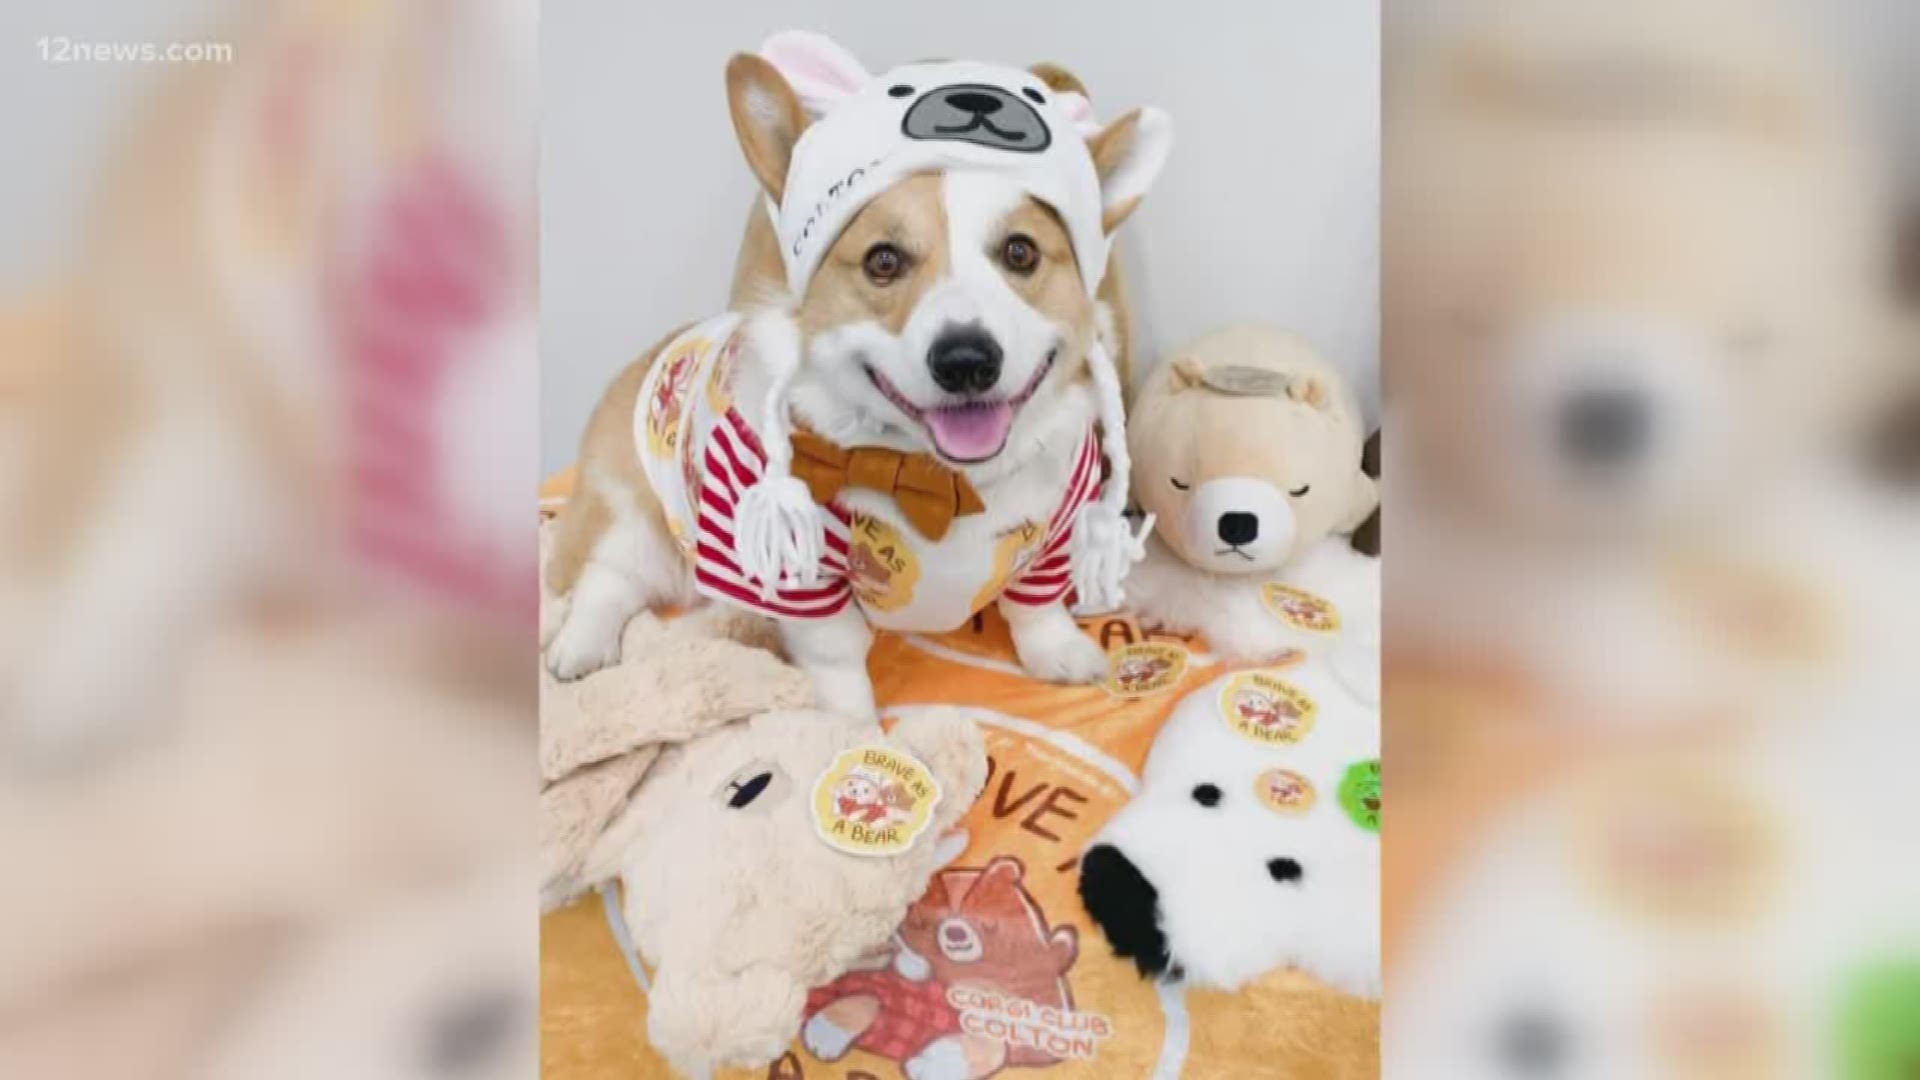 It's been a stressful week, so here's some good puppy news! Colton the corgi is in recovery after a recent surgery adorable puppies are ready to come home with you!